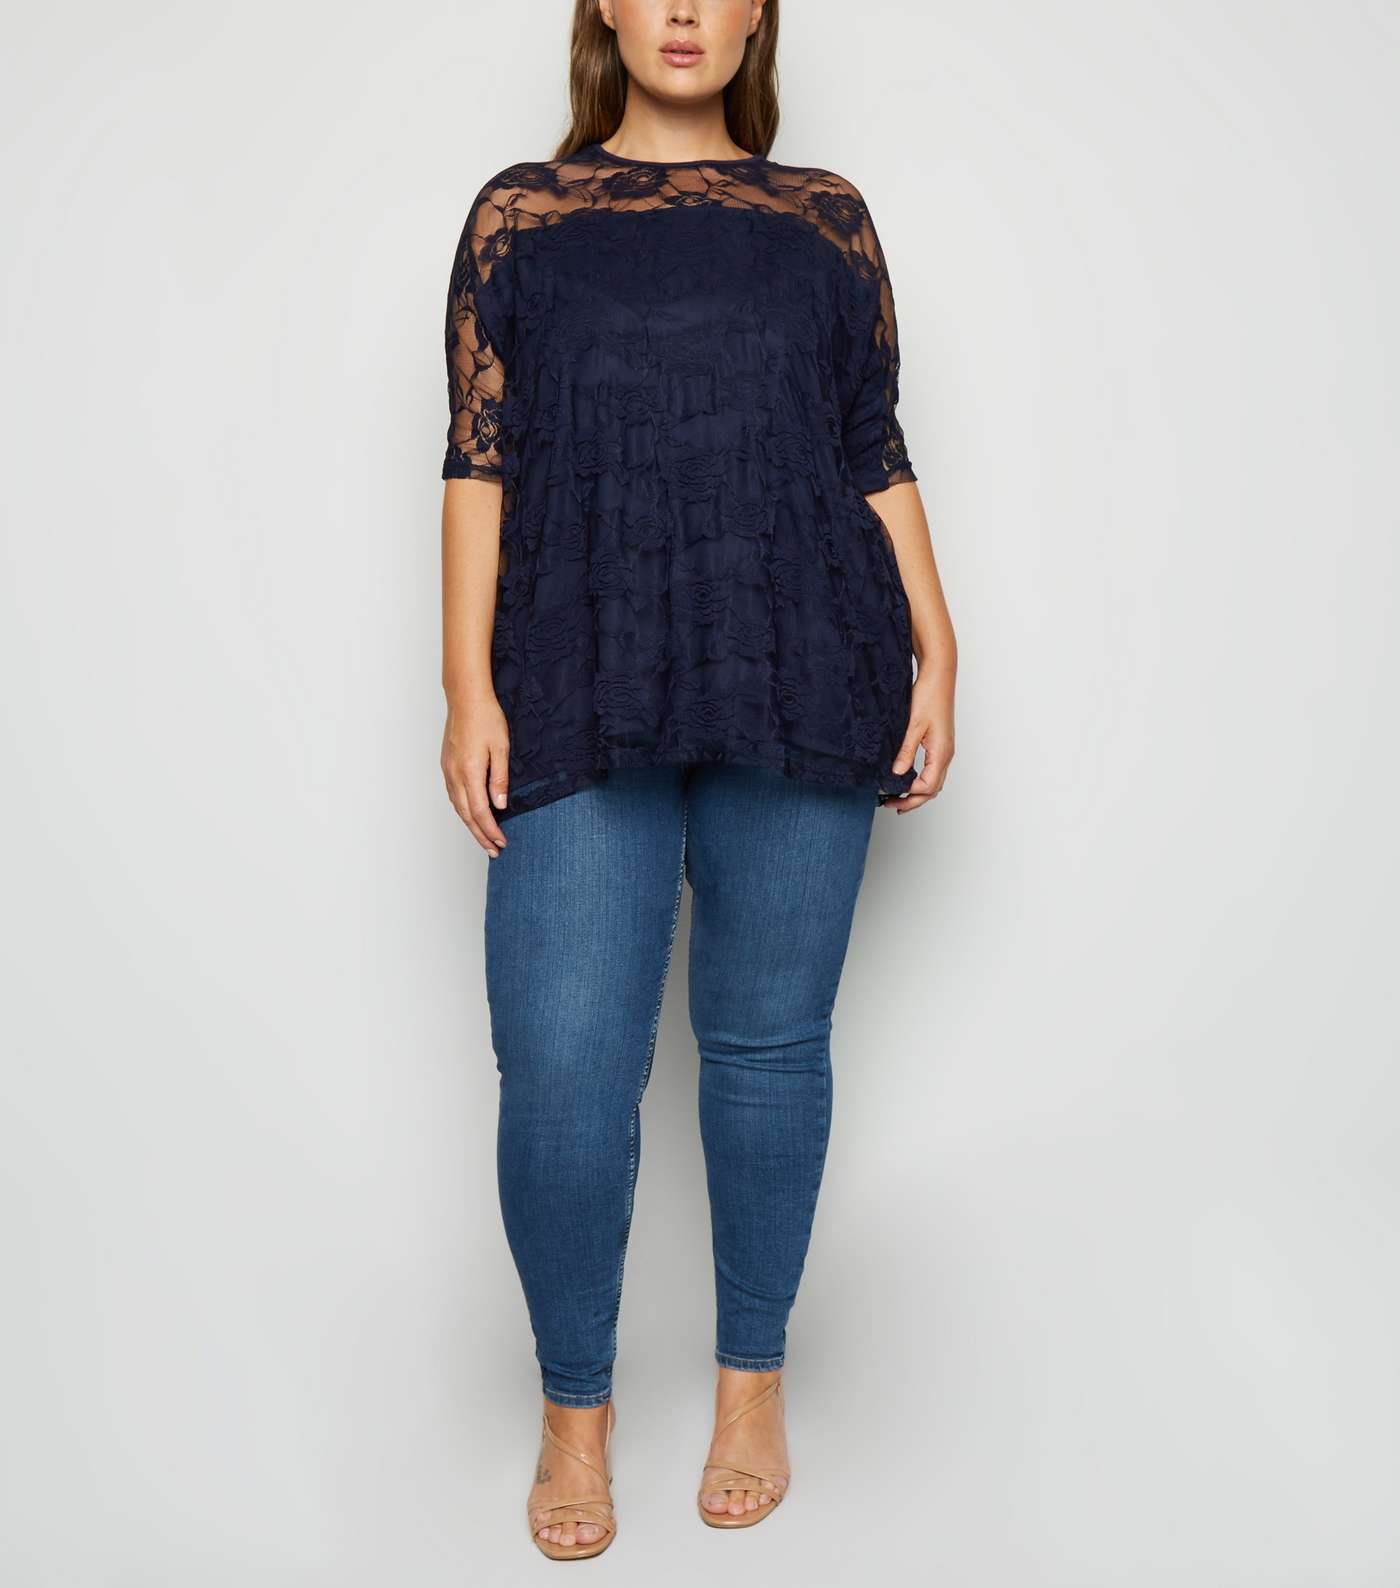 Mela Curves Navy Lace Overlay Top